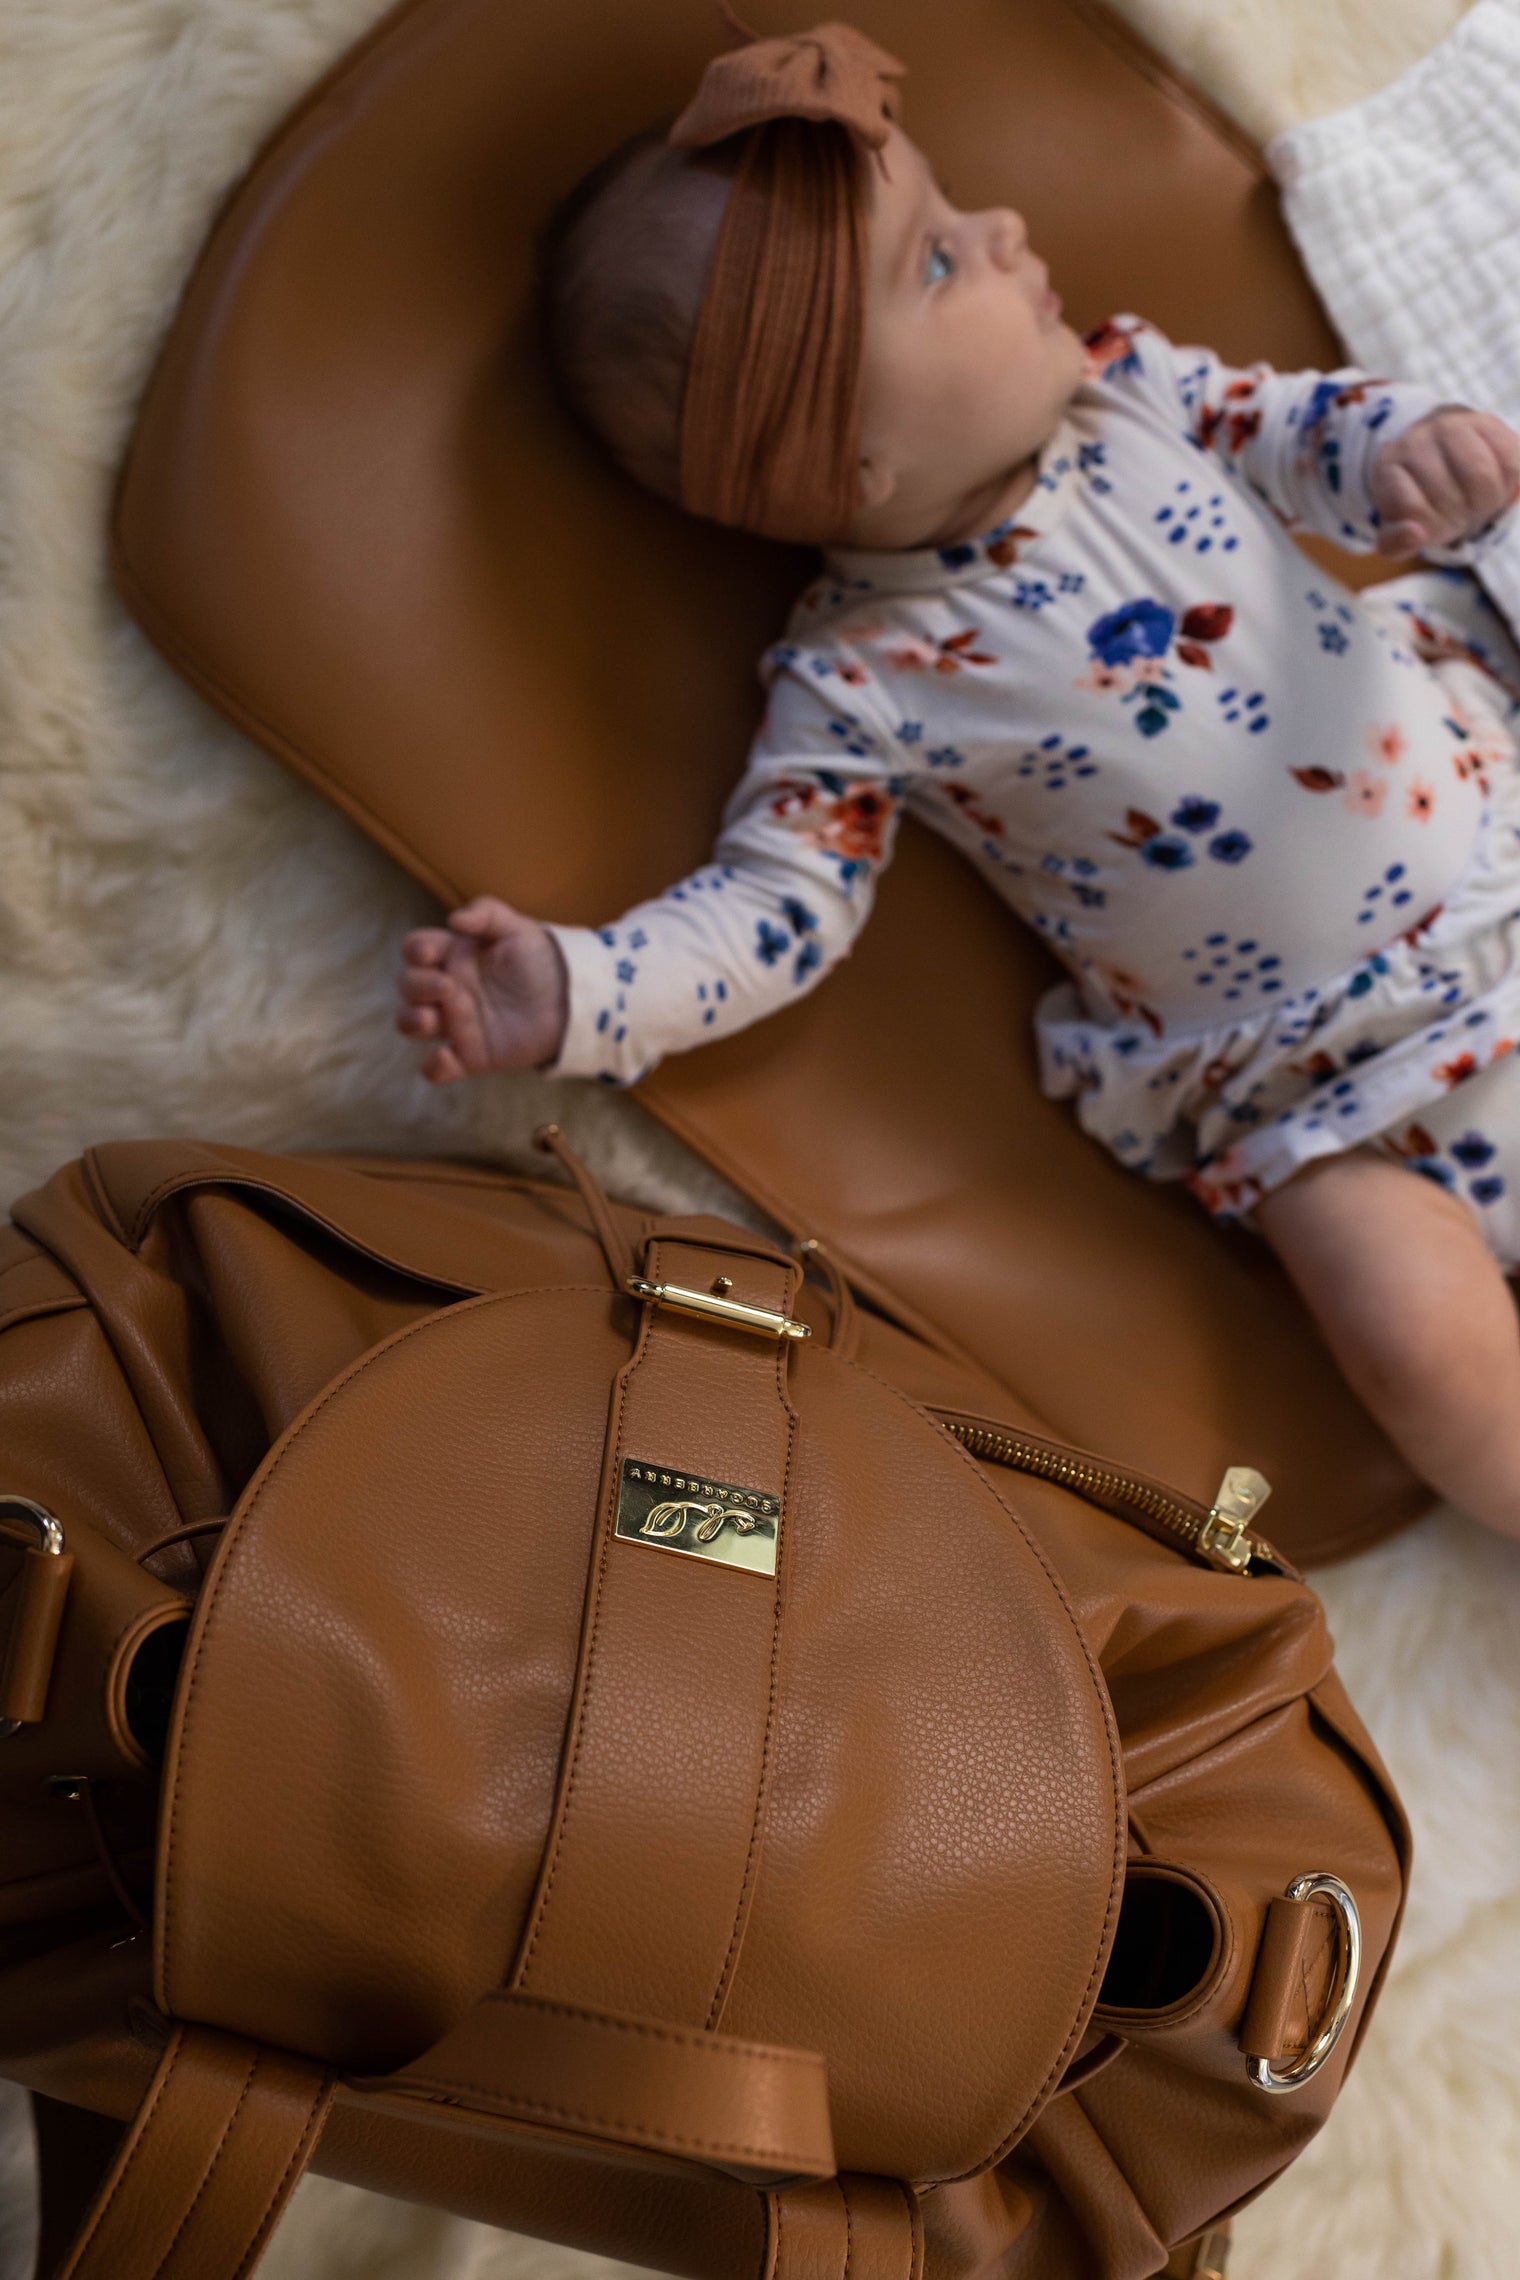 The Ultimate Diaper Bag Checklist for On-the-Go Parents